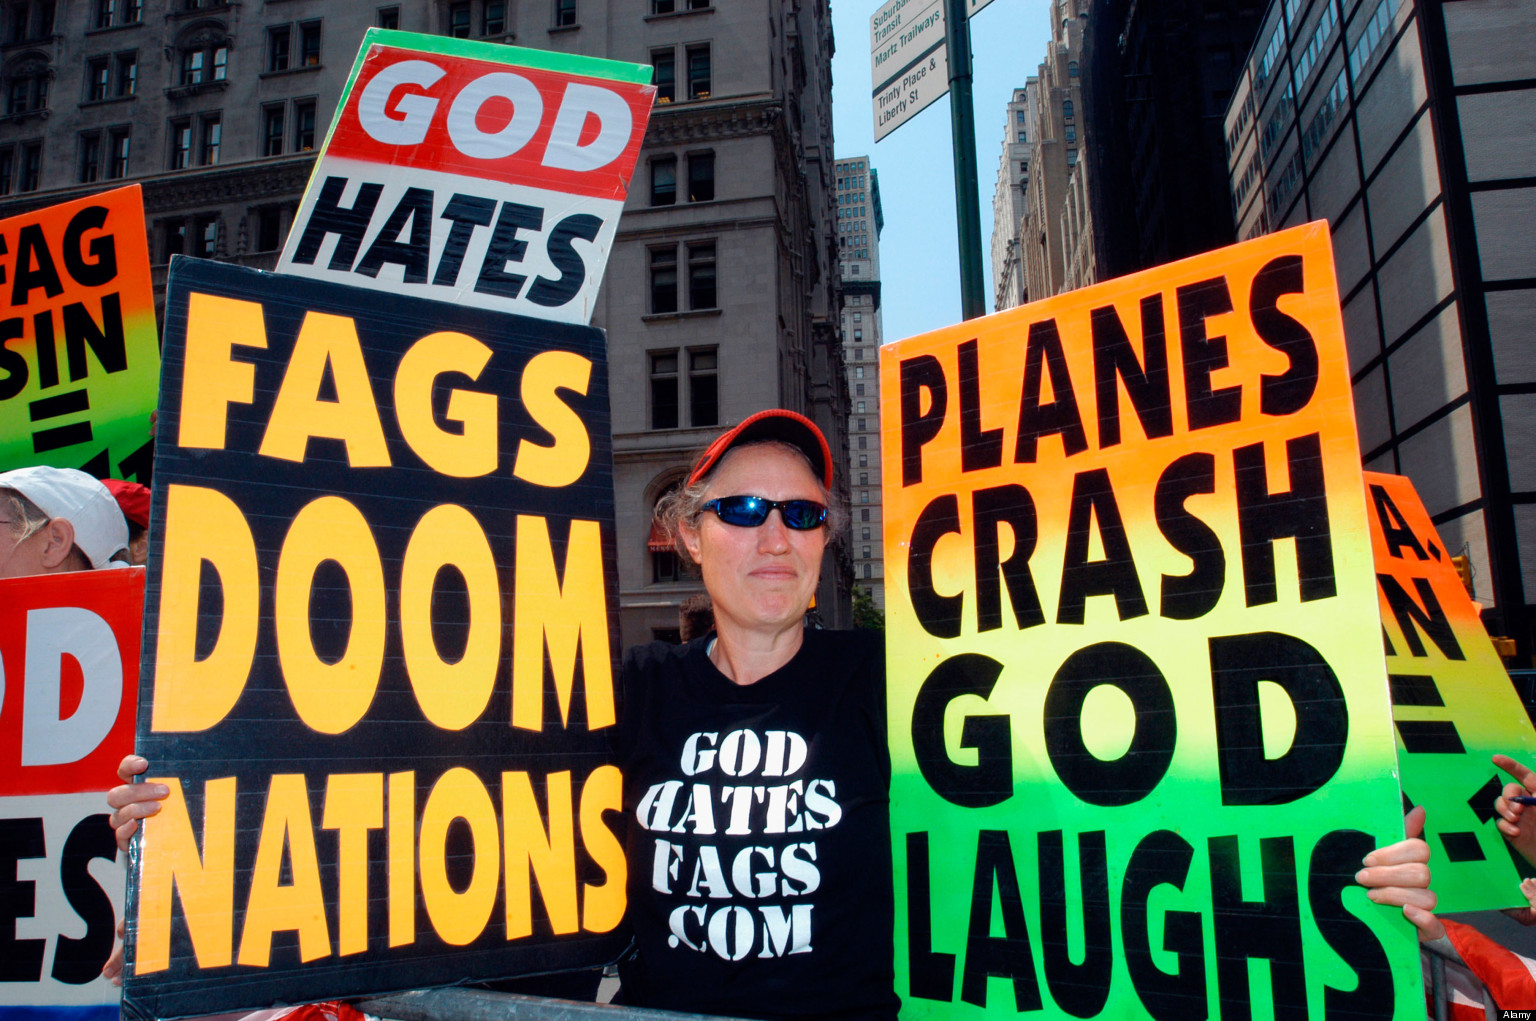 Members of the Westboro Baptist Church from Topeka Kansas demonstrate against homosexuality